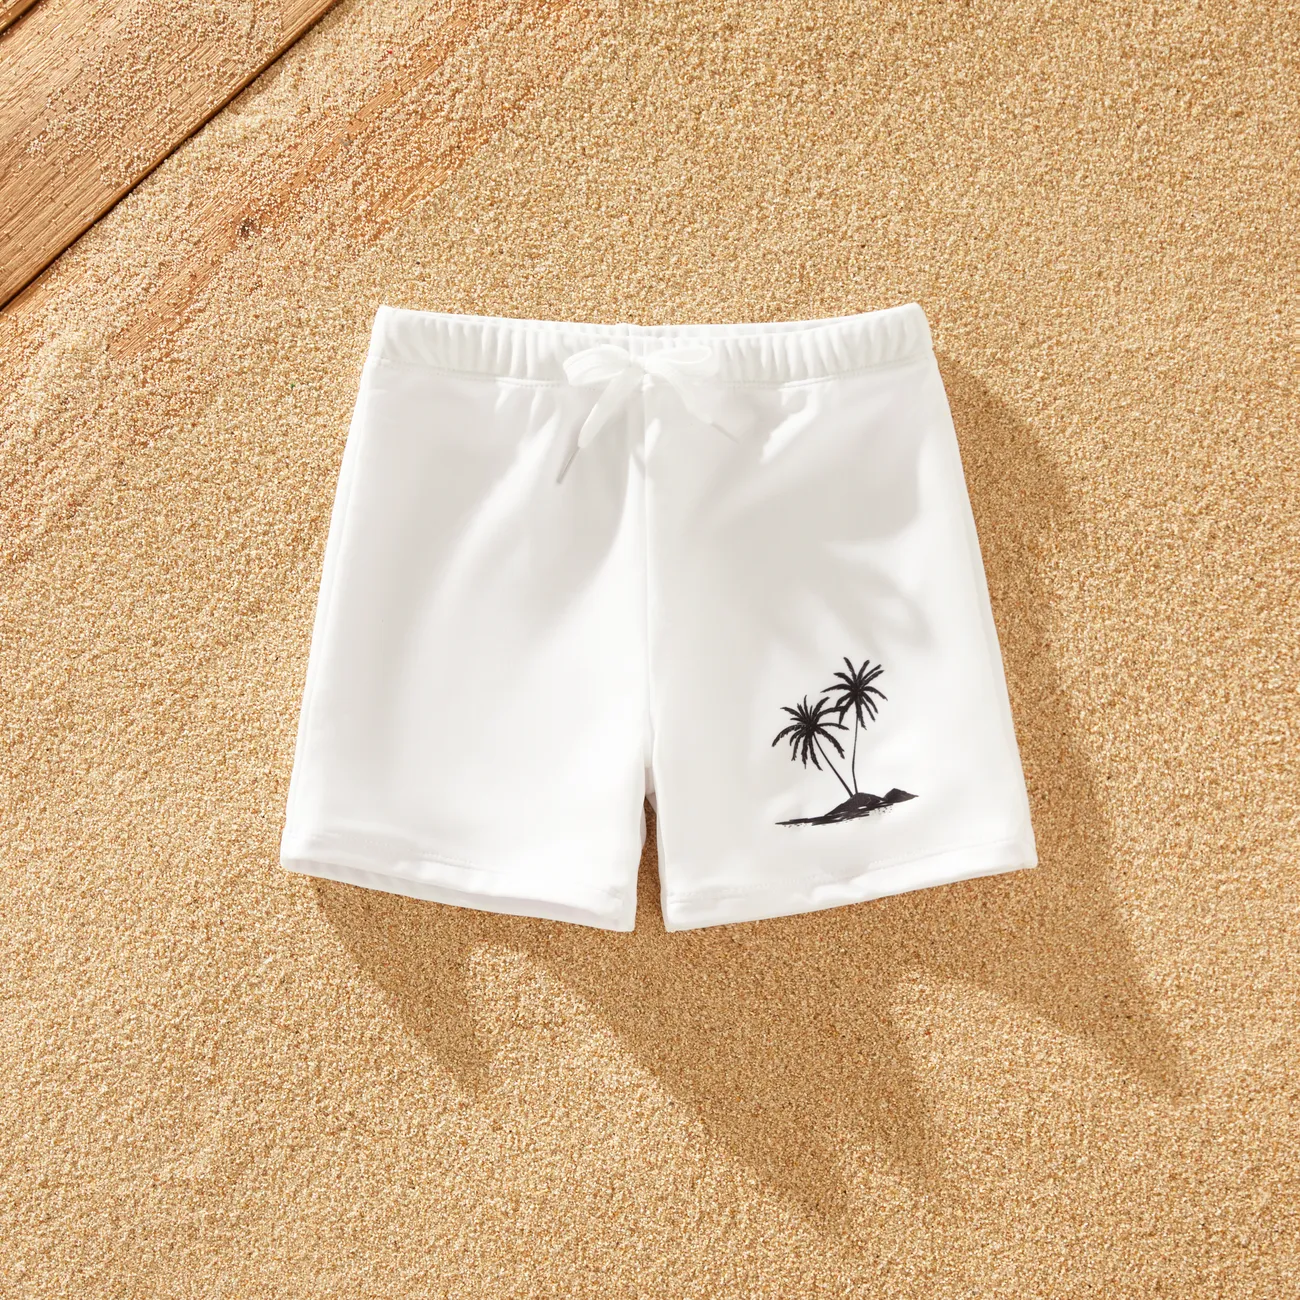 Family Matching Drawstring Swim Trunks or White Bow Accent Eyelet Strap One-Piece Swimsuit  White big image 1